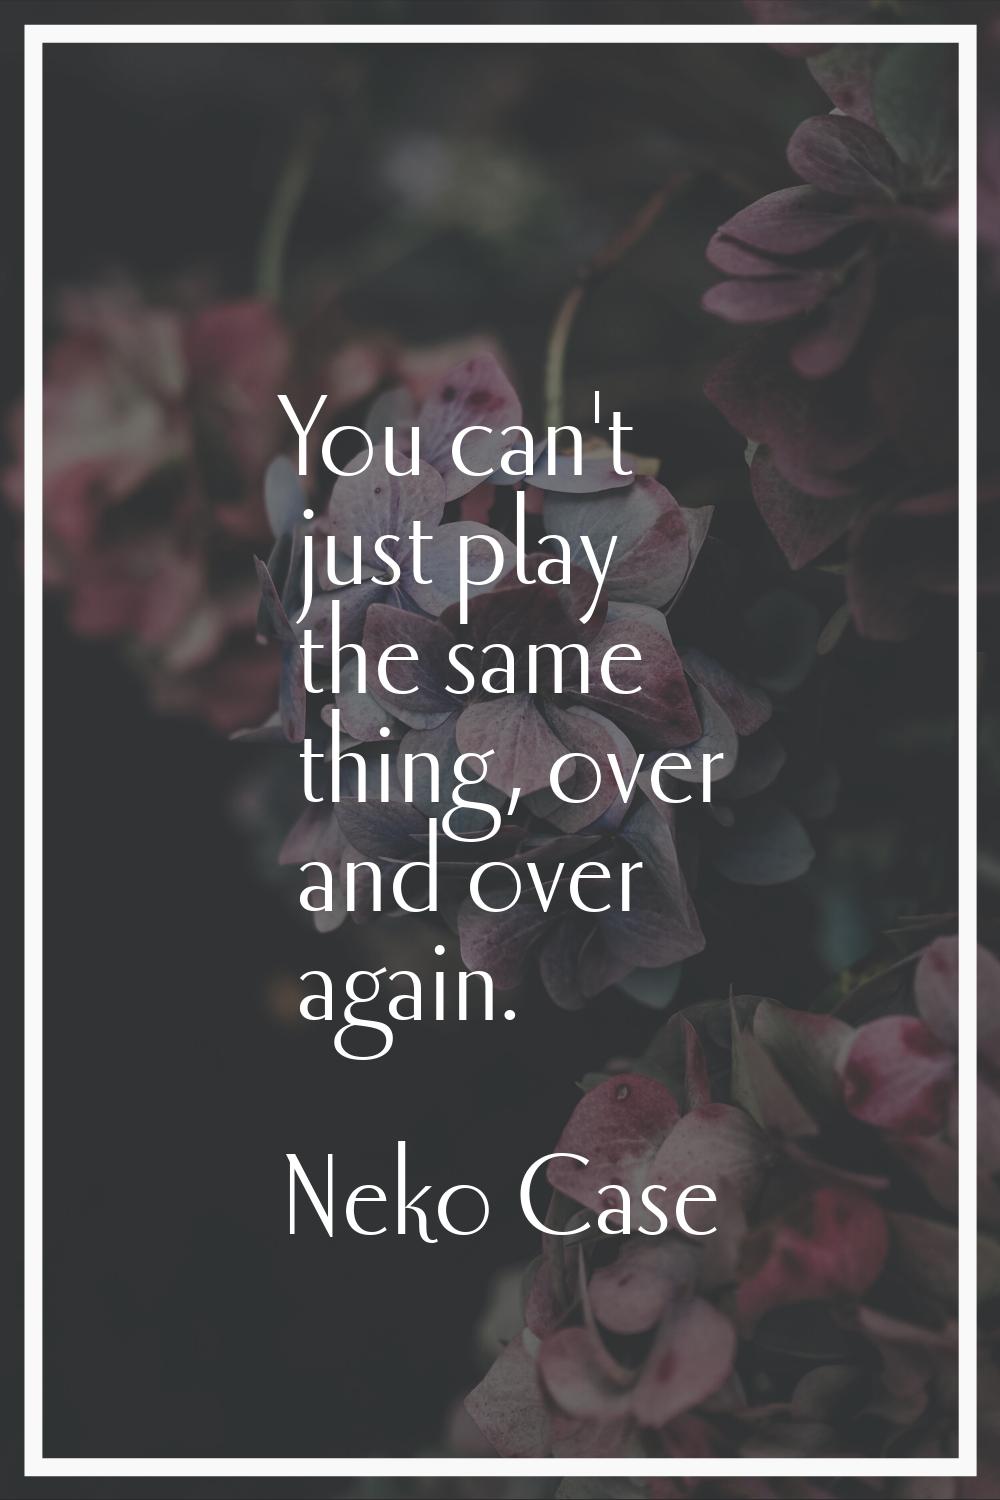 You can't just play the same thing, over and over again.